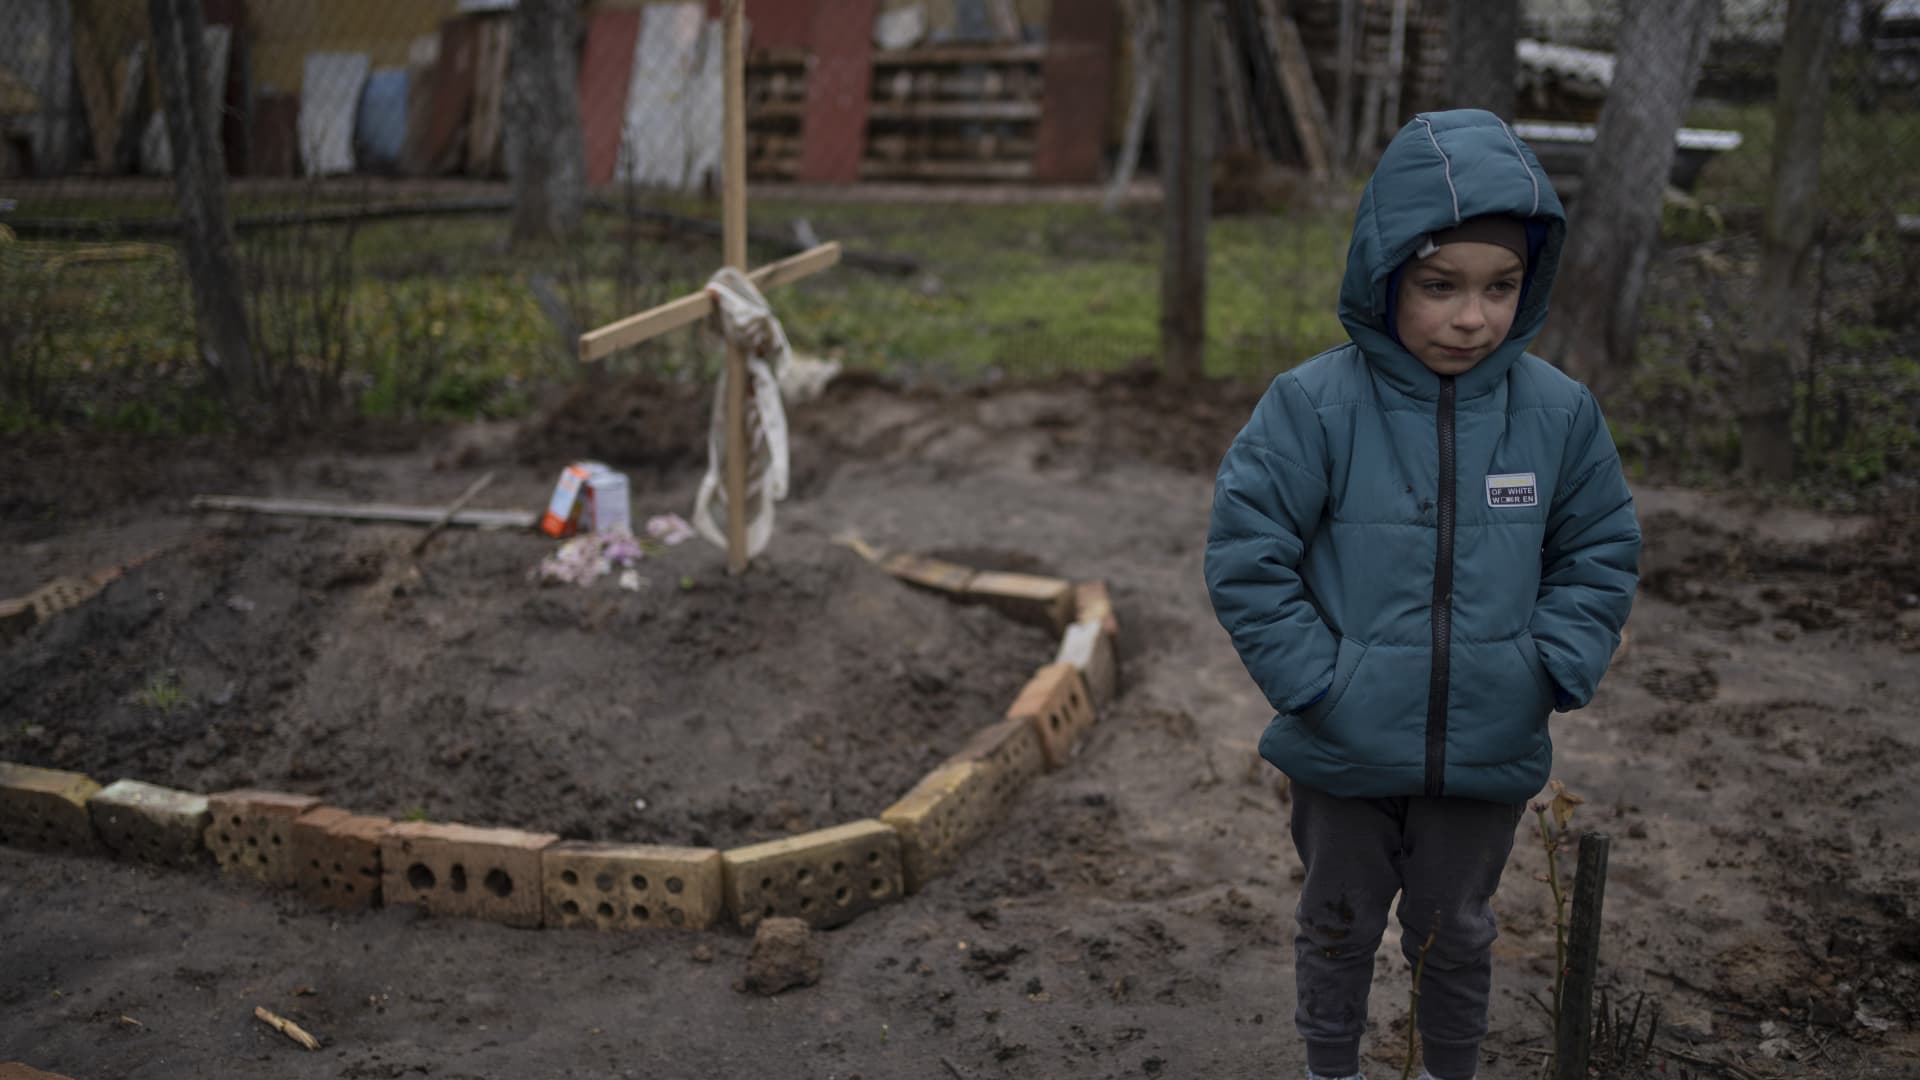 In the courtyard of their house, Vlad, 6, stands near the grave of his mother, who died, on the outskirts of Kyiv, Ukraine, Monday, April 4, 2022.